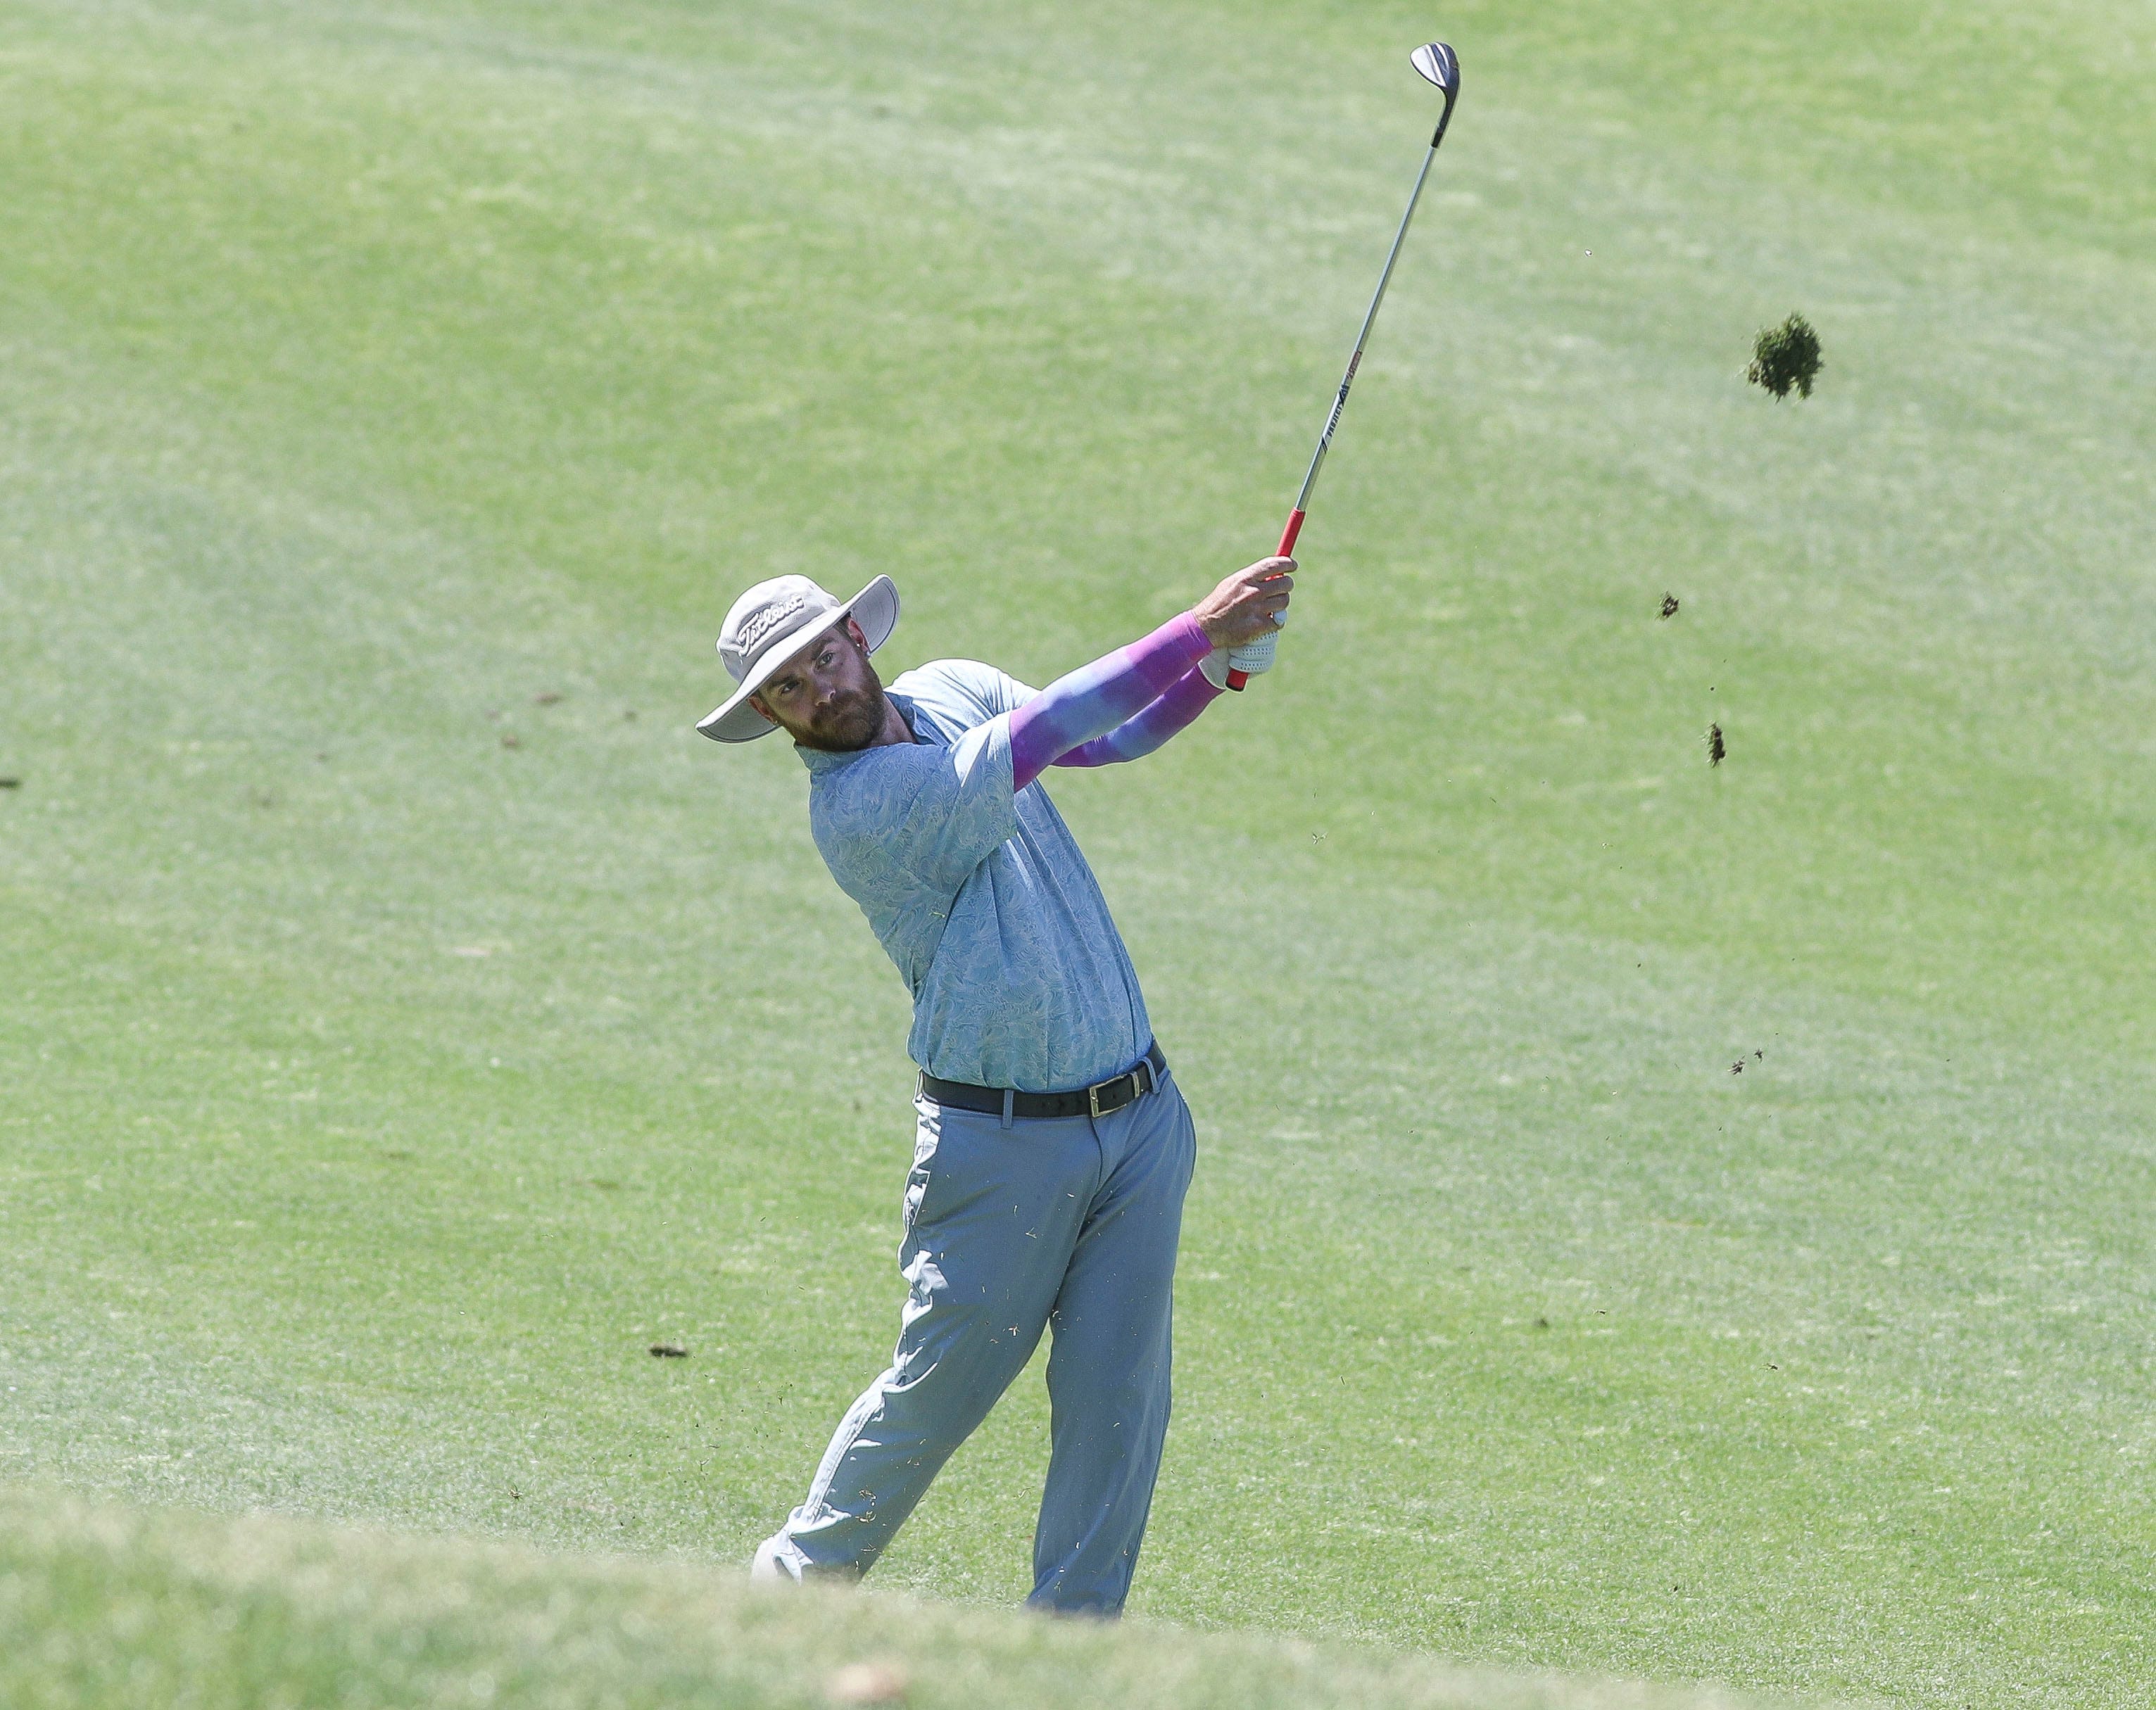 Rancho Mirage pro survives playoff at U.S. Open local qualifer in Palm Desert